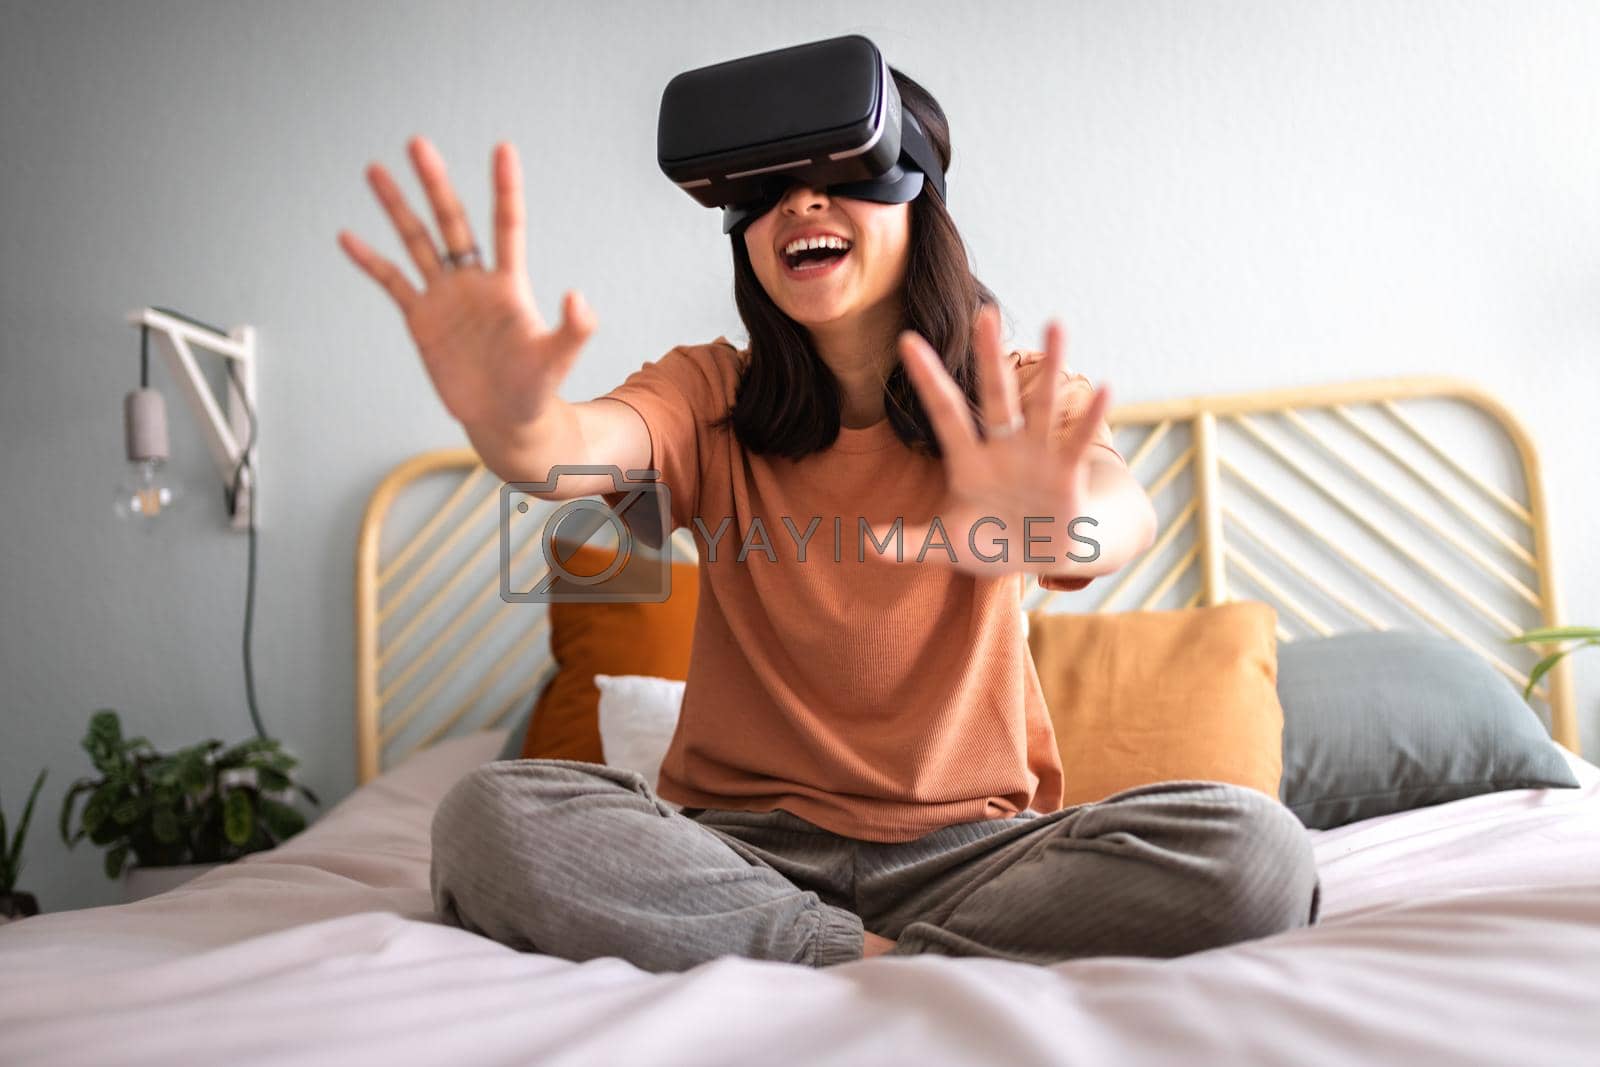 Royalty free image of Happy young asian woman at home moving hands playing simulation video game in virtual reality using VR goggles. by Hoverstock